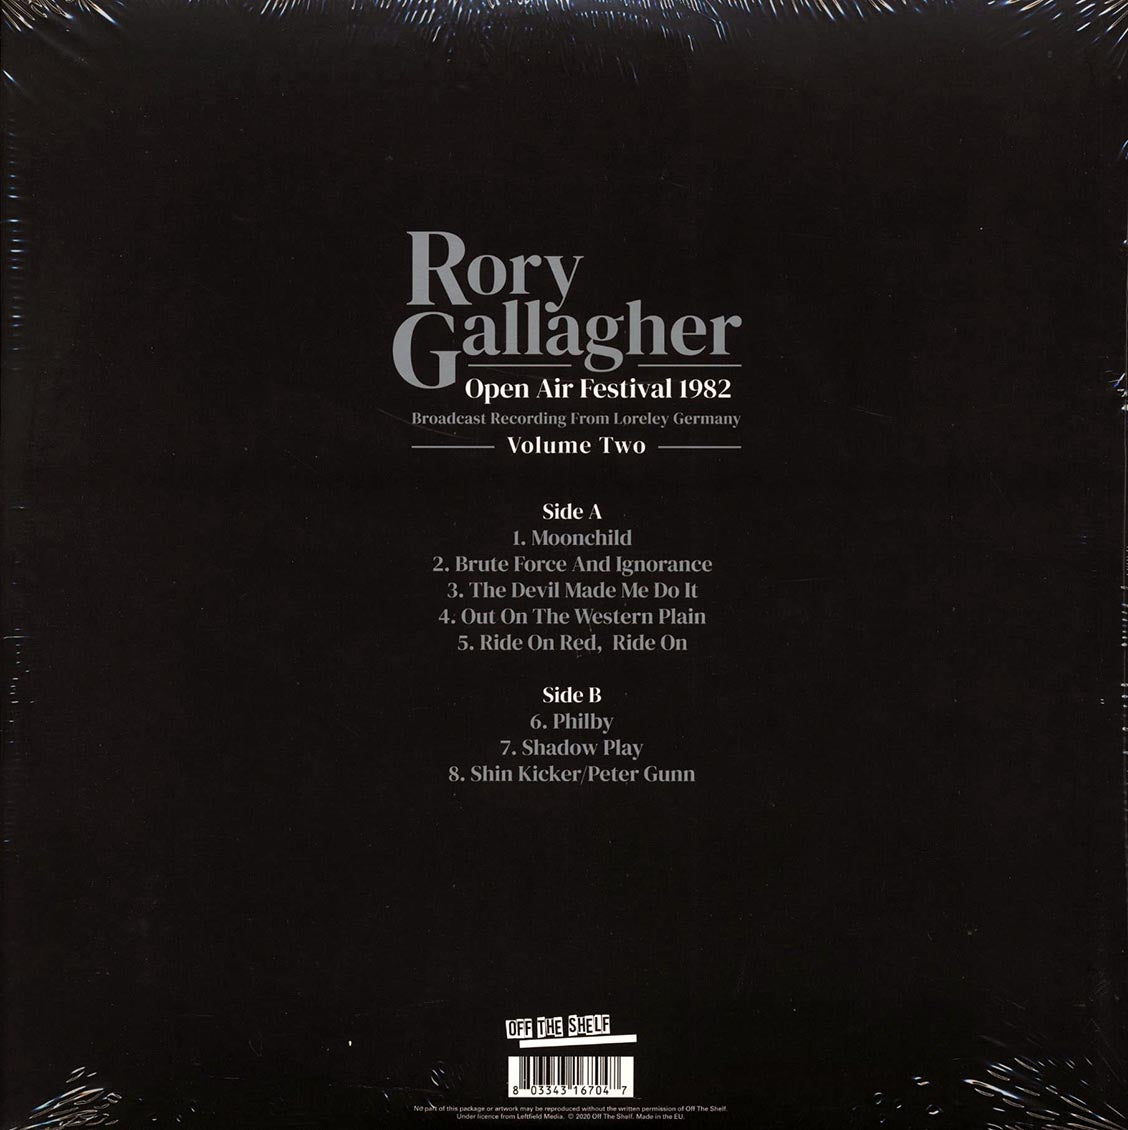 Rory Gallagher - Open Air Festival 1982 Volume 2: Broadcast Recording From Loreley Germany - Vinyl LP, LP